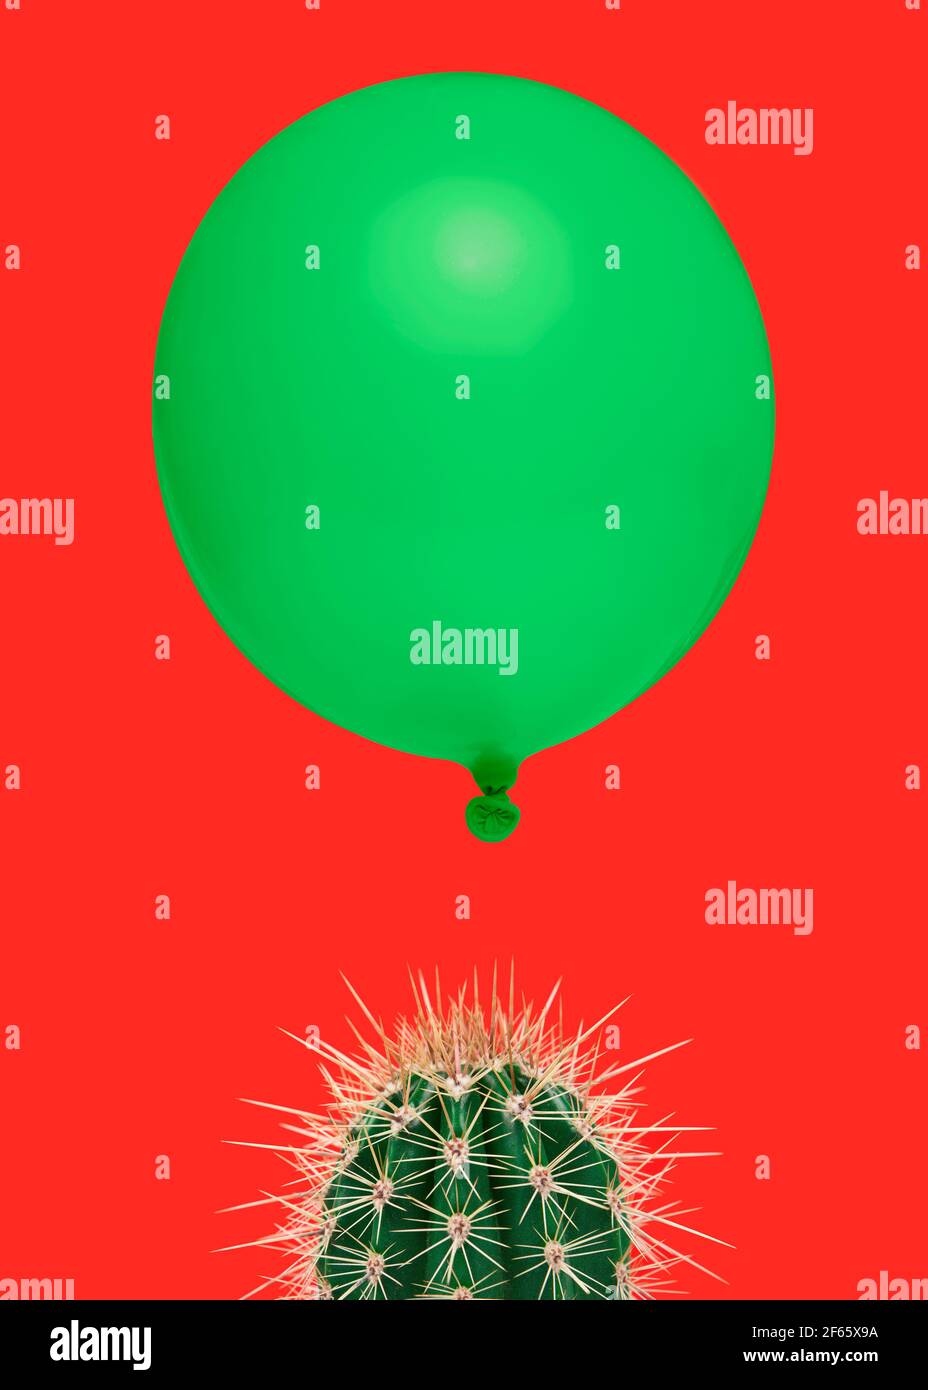 Cactus plant on a bright red background with above it floating a green balloon as a concept for something which could go wrong fast easily Stock Photo